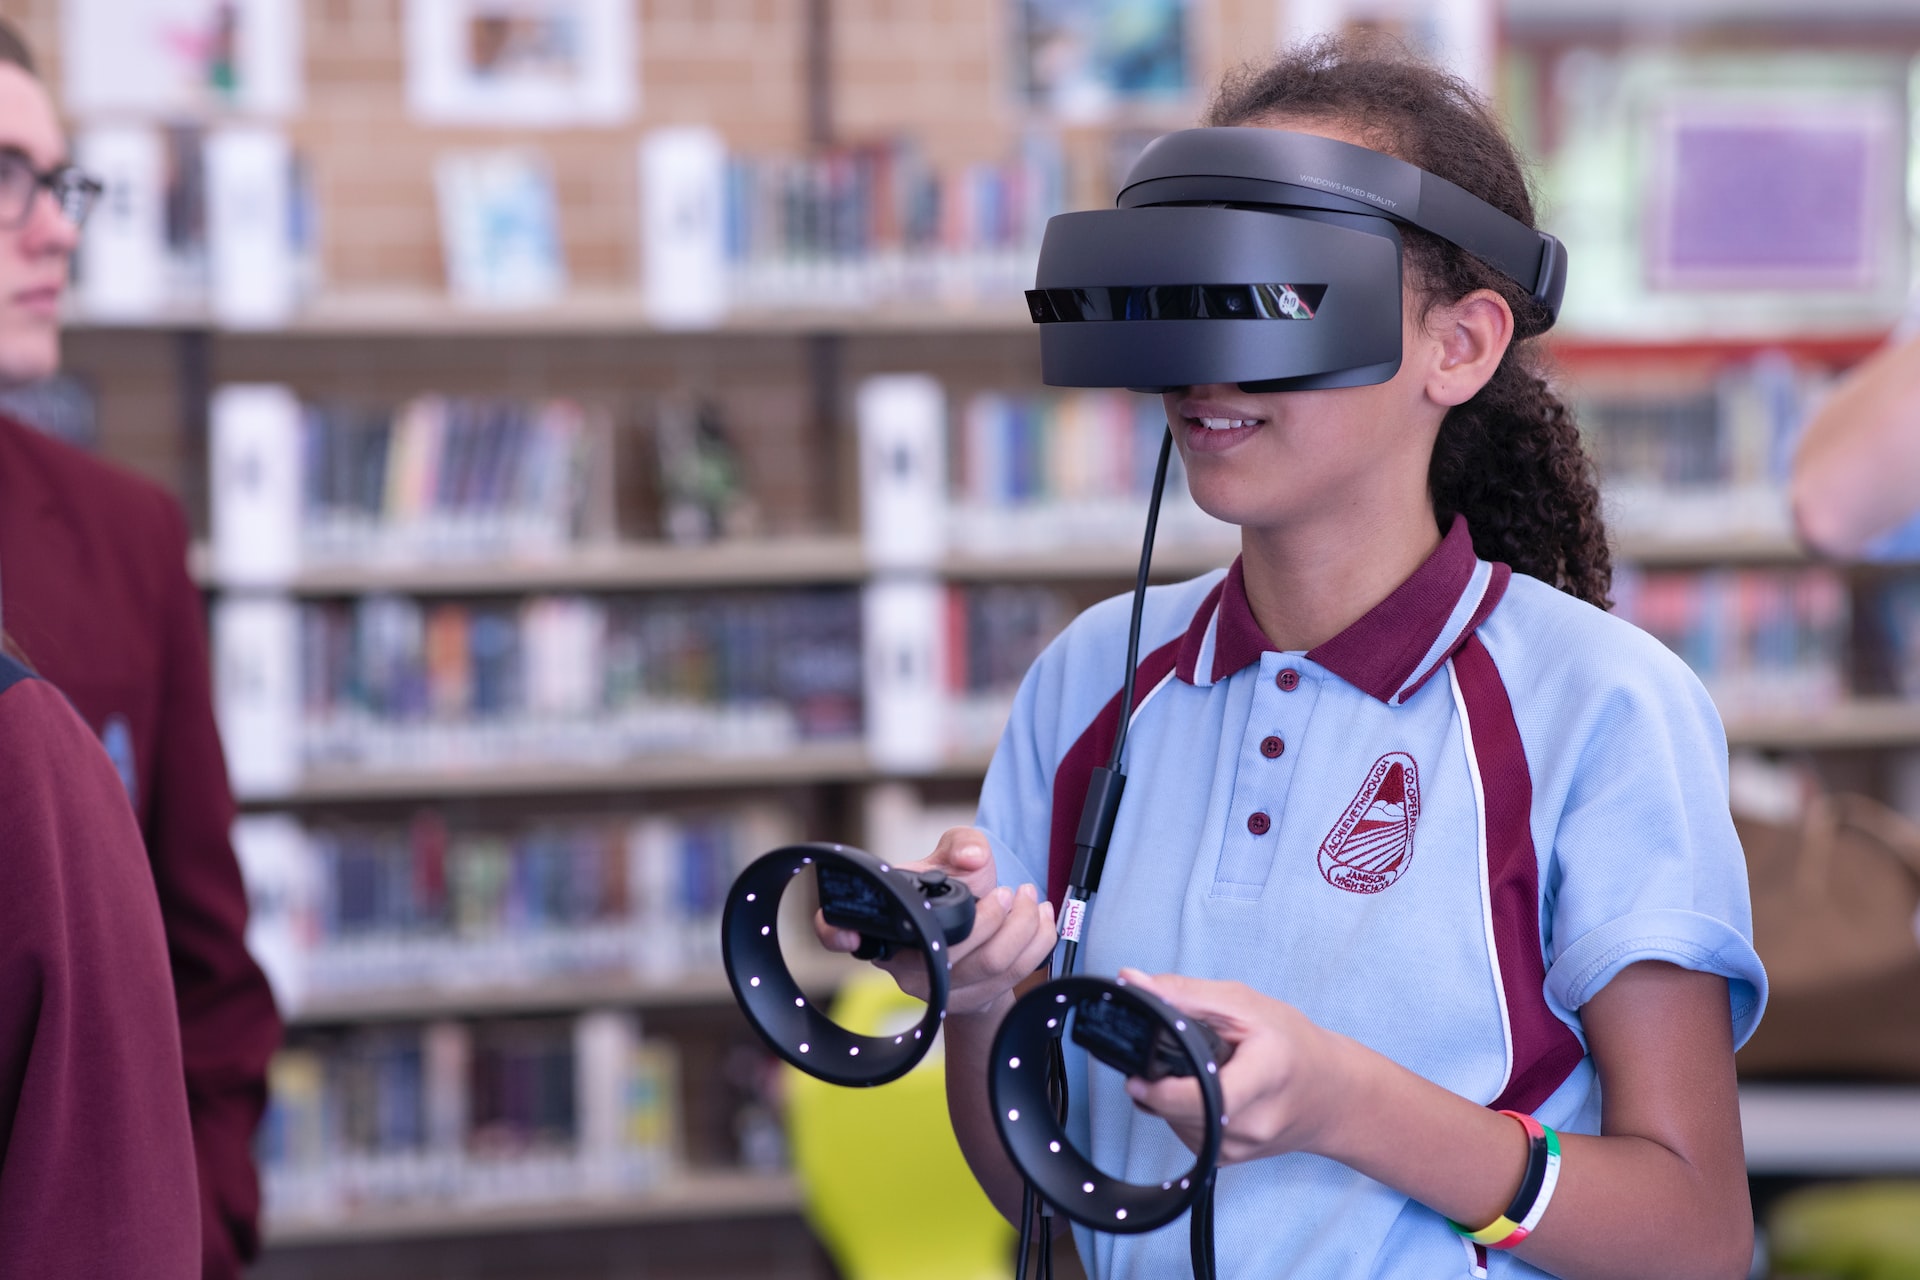 “Make no mistake that the metaverse is coming”: the metaverse and what it could mean for children, teachers and schools